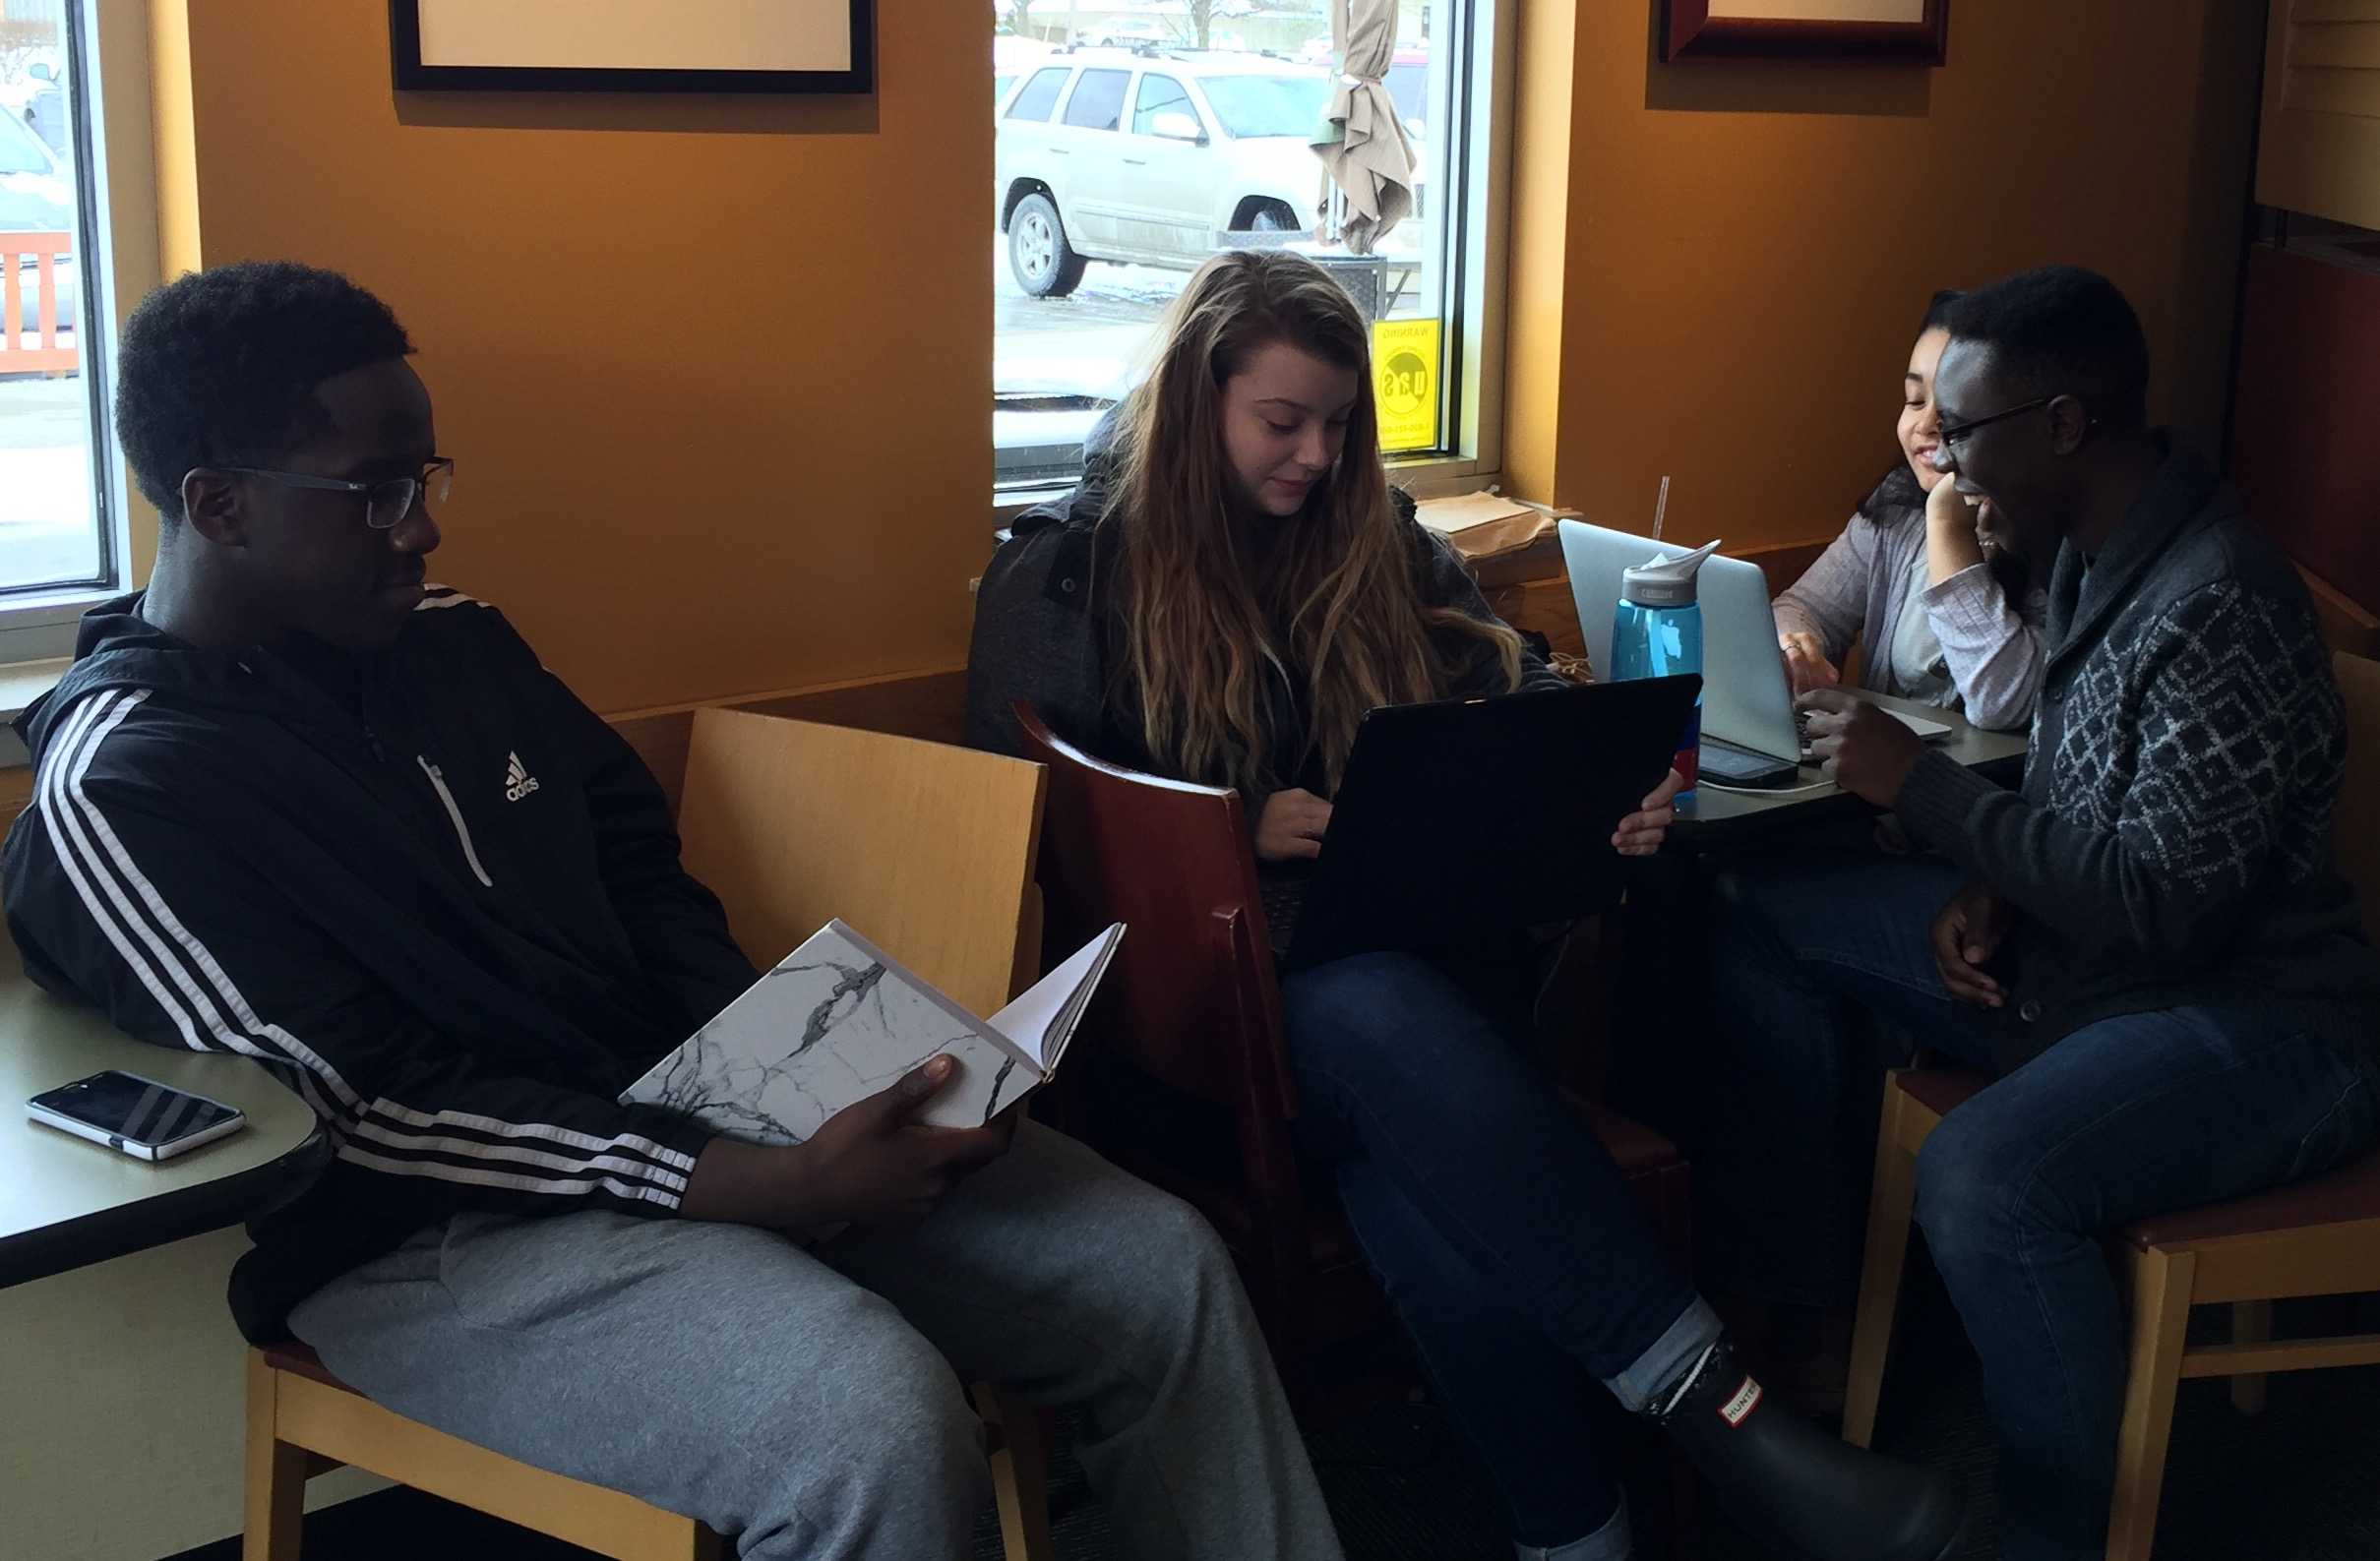 On Jan. 6, FCPS schools were closed, but these Dunbar students meet at Panera to study at noon. Senior Gbutue Vorkpor said he didnt want to fall behind.